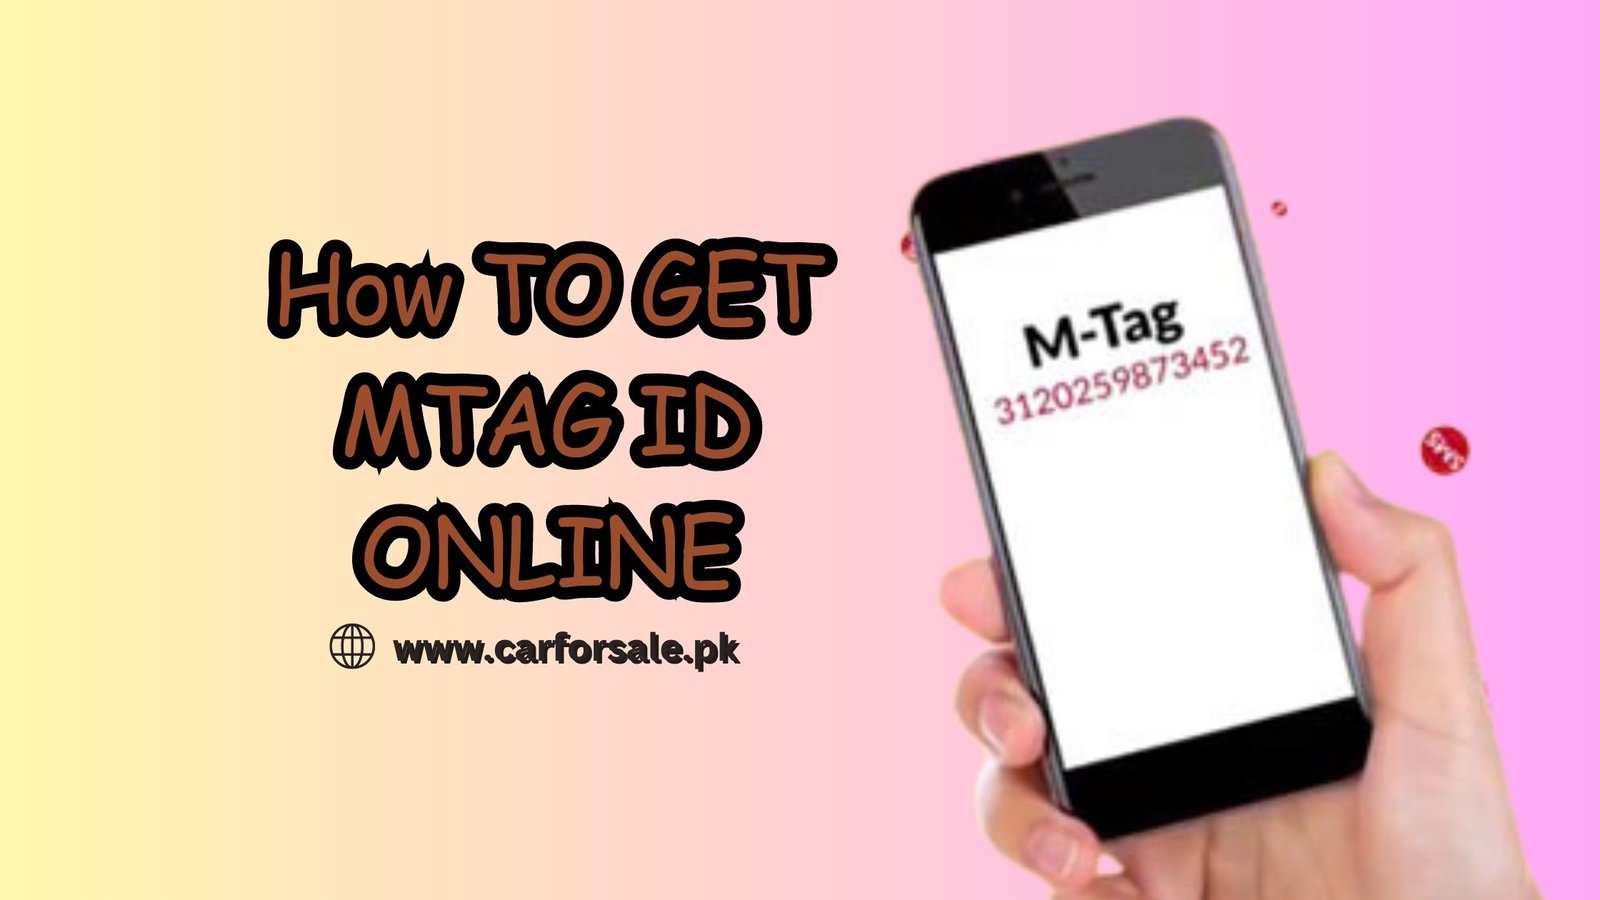 HOW TO GET M TAG ID ONLINE